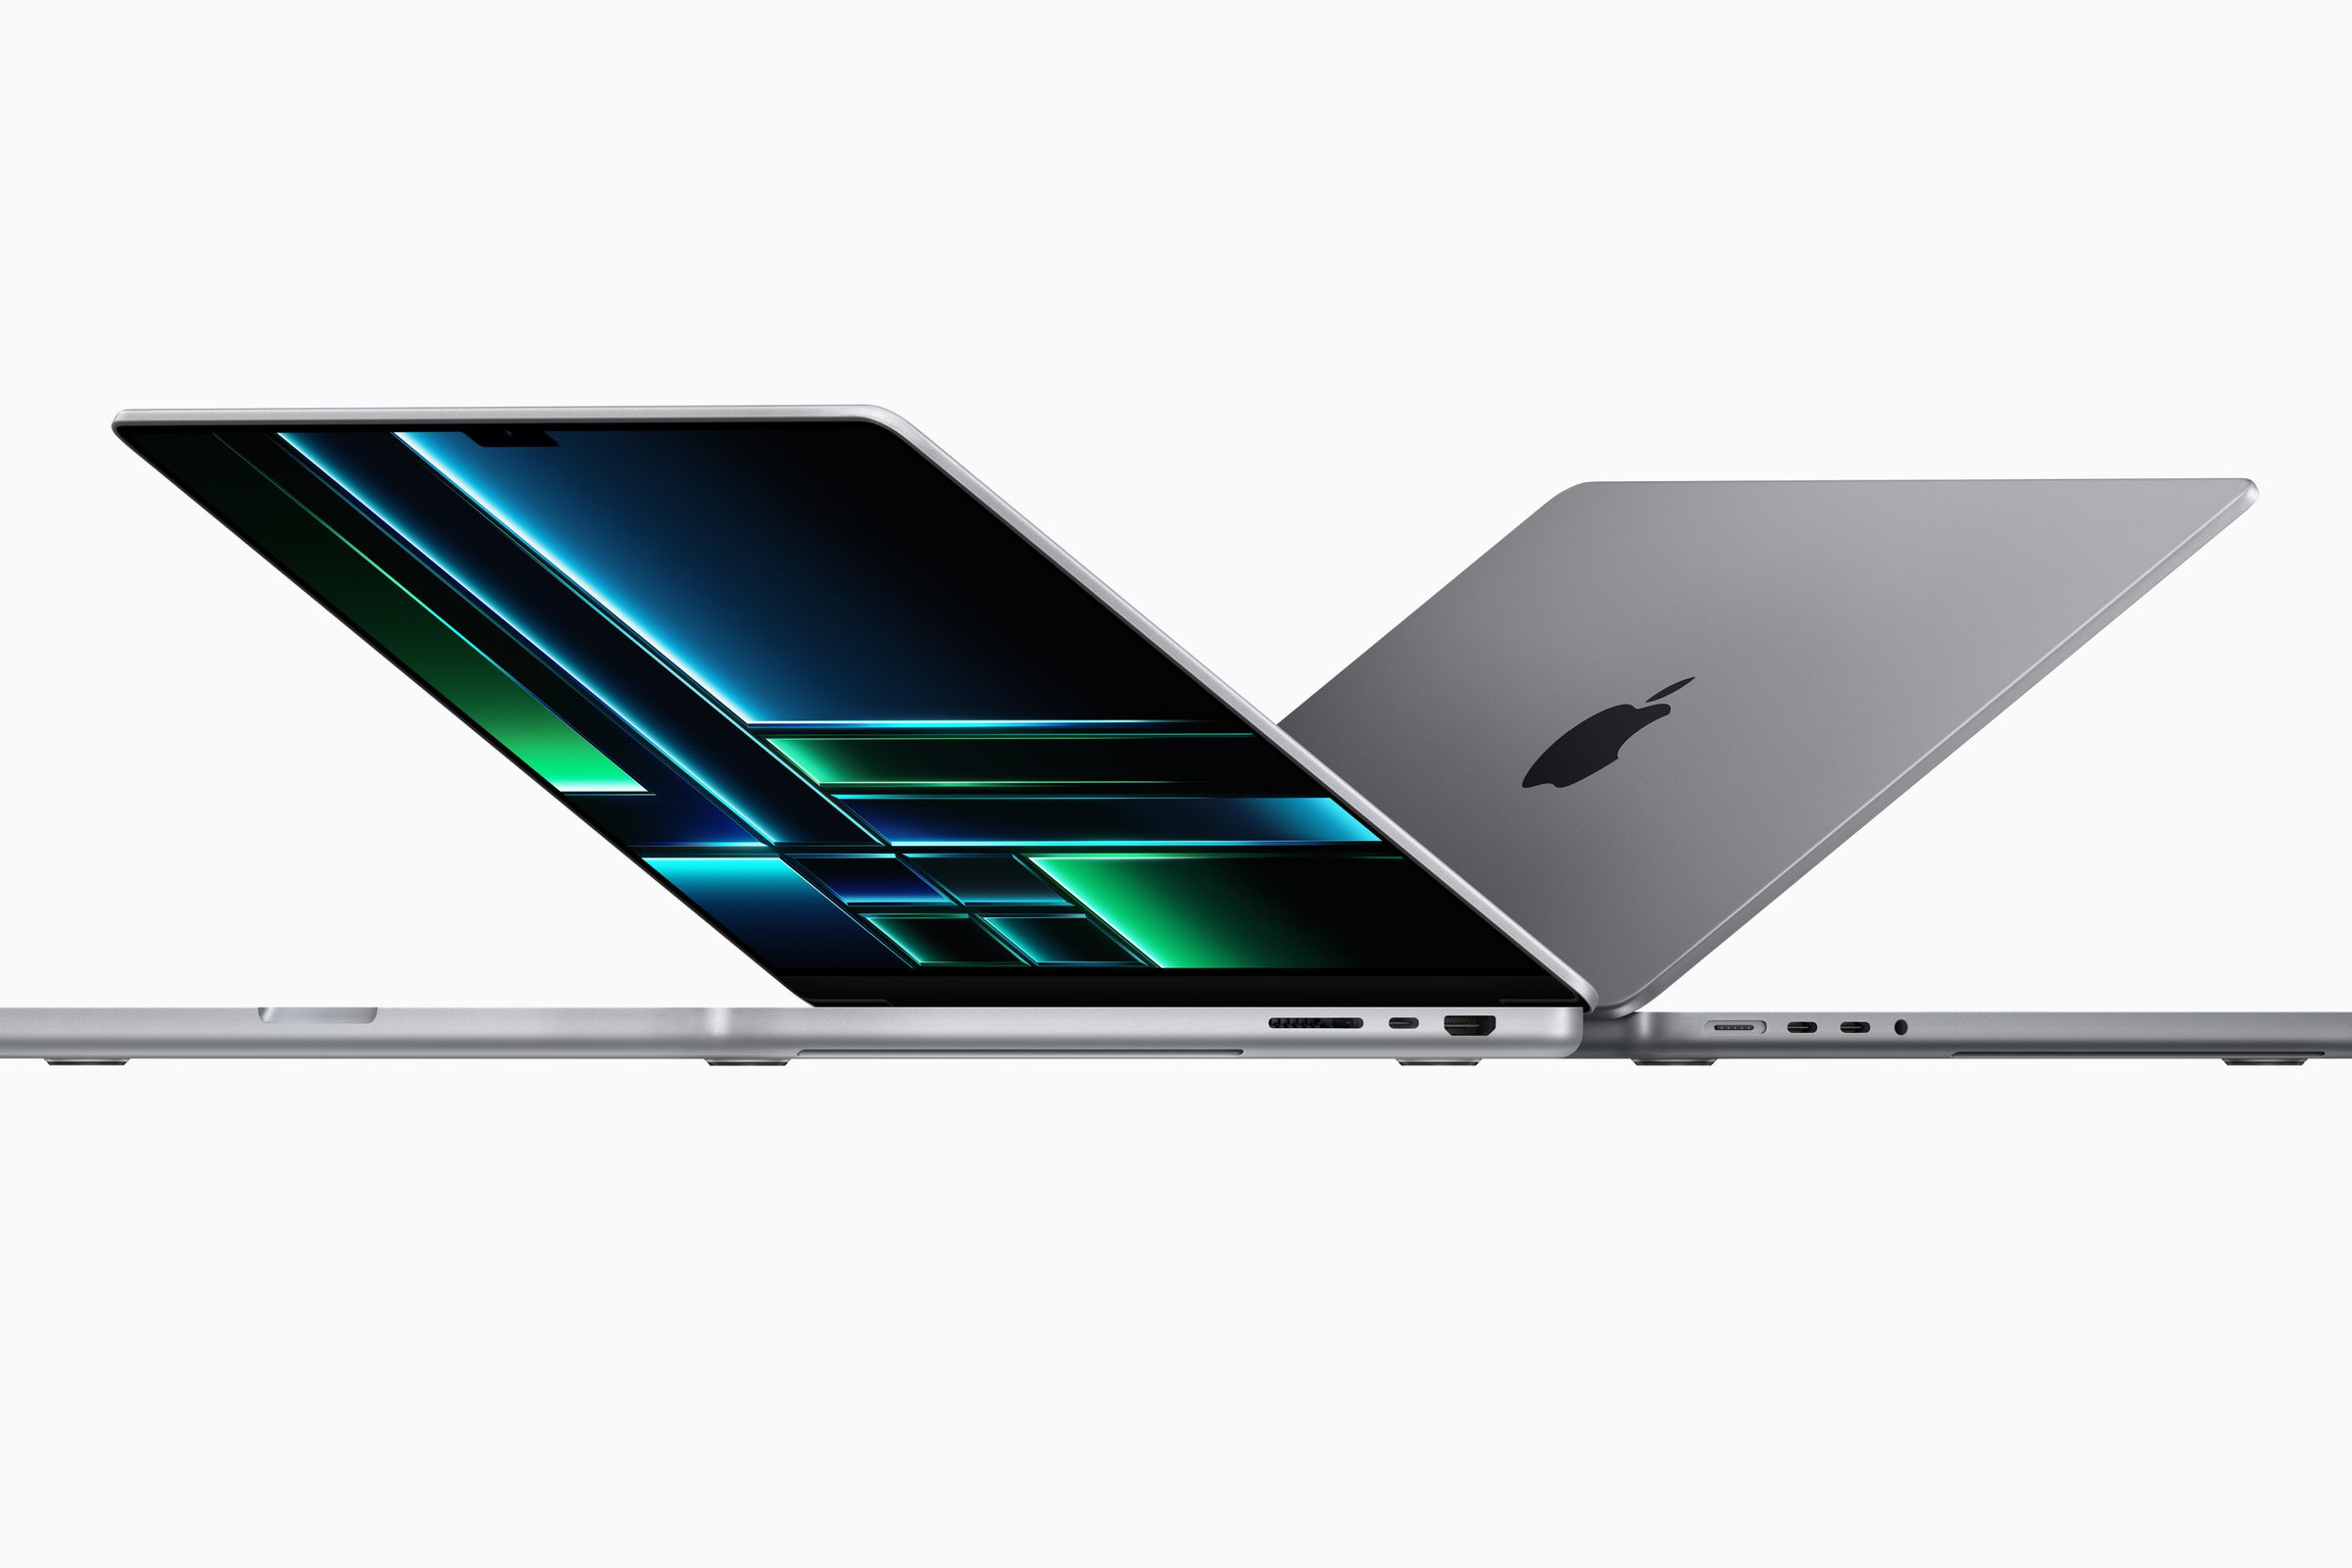 The silver 14-inch and 16-inch MacBook Pros sitting back-to-back, partially open on a white background.